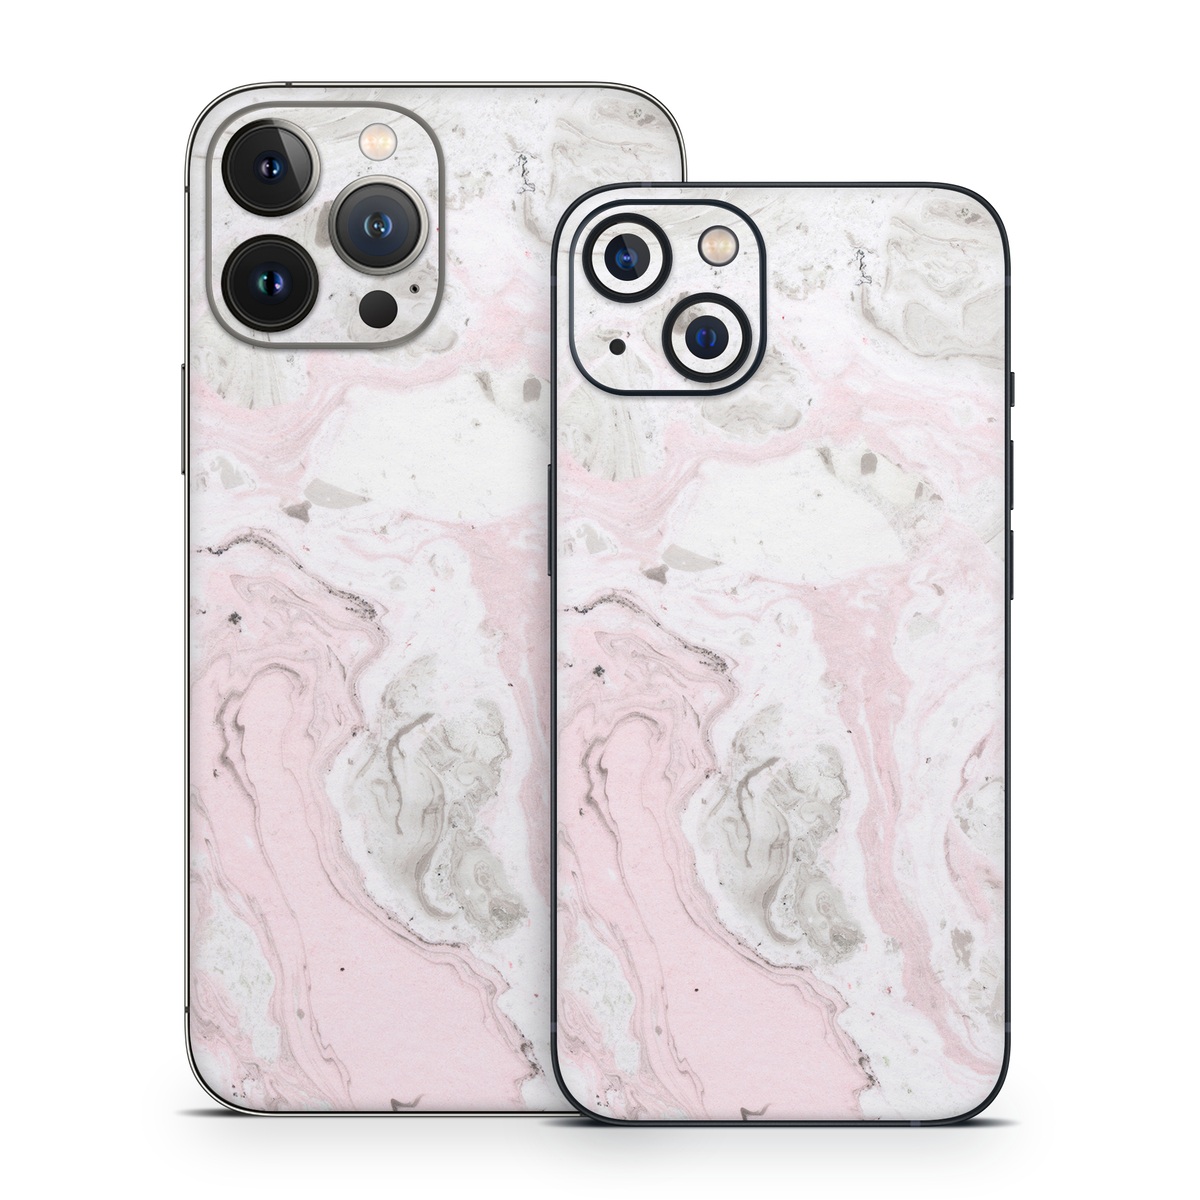 iPhone 13 Series Skin design of White, Pink, Pattern, Illustration, with pink, gray, white colors